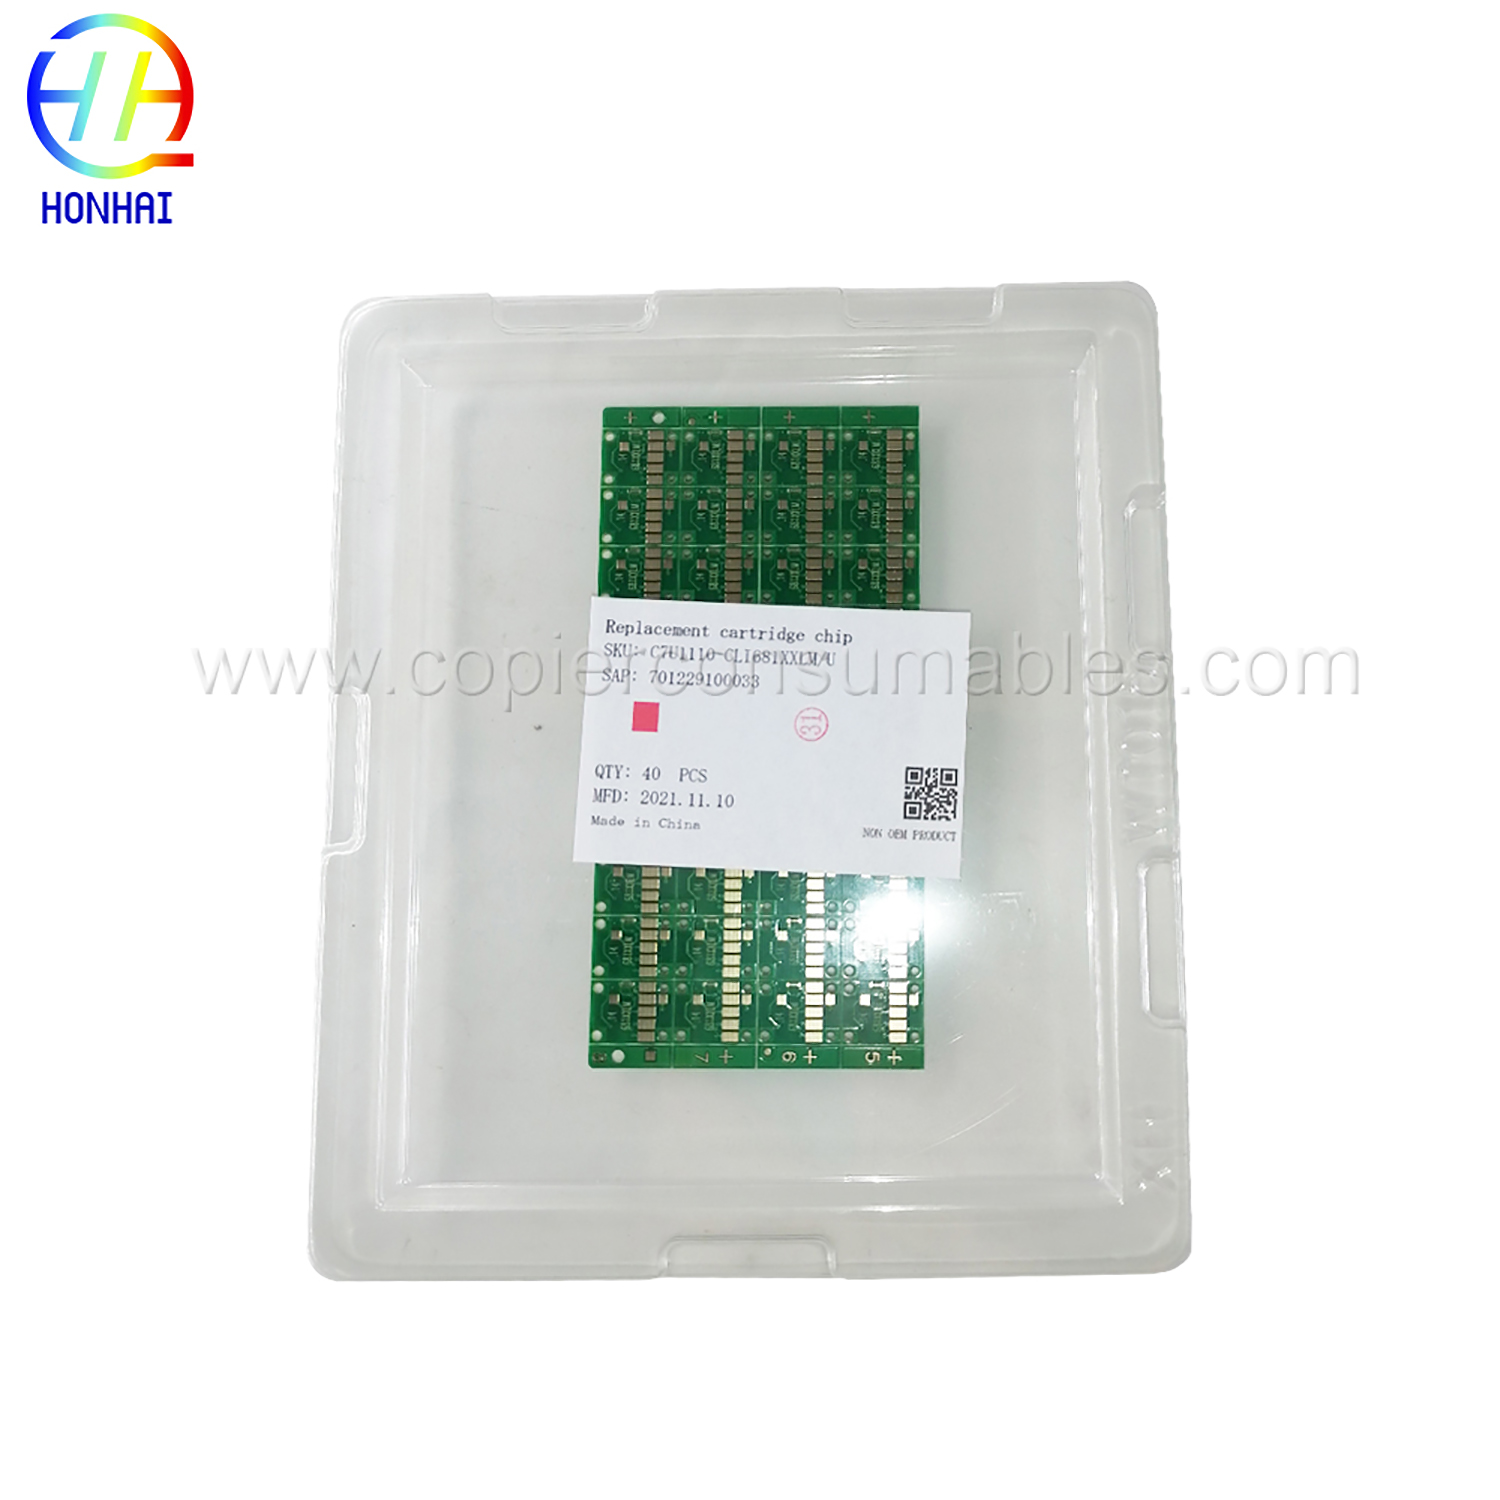 Cartridge Chip (M) for Canon 671 681 686 681XL (1) 拷贝